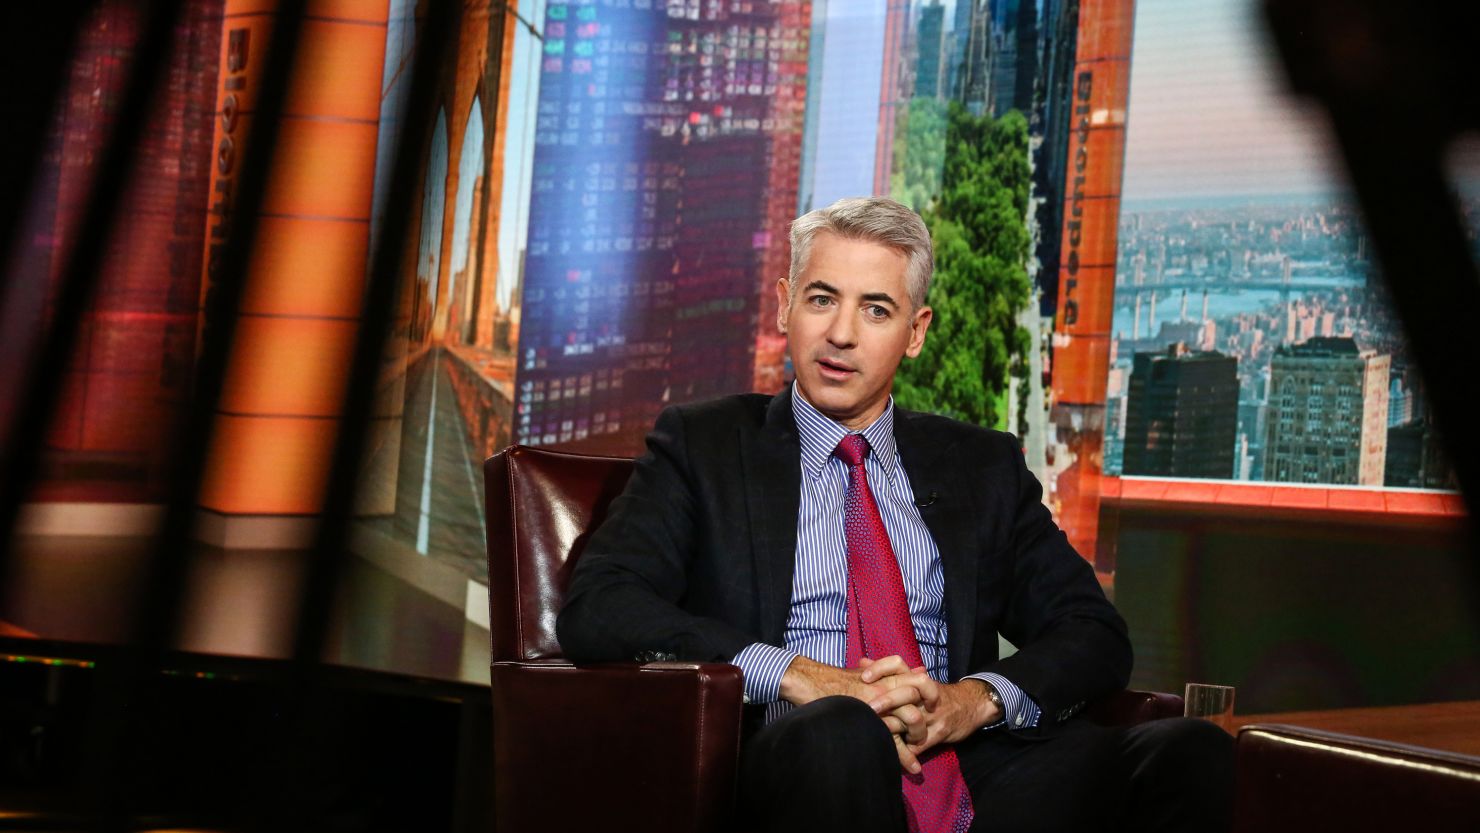 Bill Ackman, chief executive officer of Pershing Square Capital Management LP, speaks during a Bloomberg Television interview in New York, U.S., on Wednesday, Nov. 1, 2017. Ackman discussed his proxy fight at Automatic Data Processing. Photographer: Christopher Goodney/Bloomberg via Getty Images